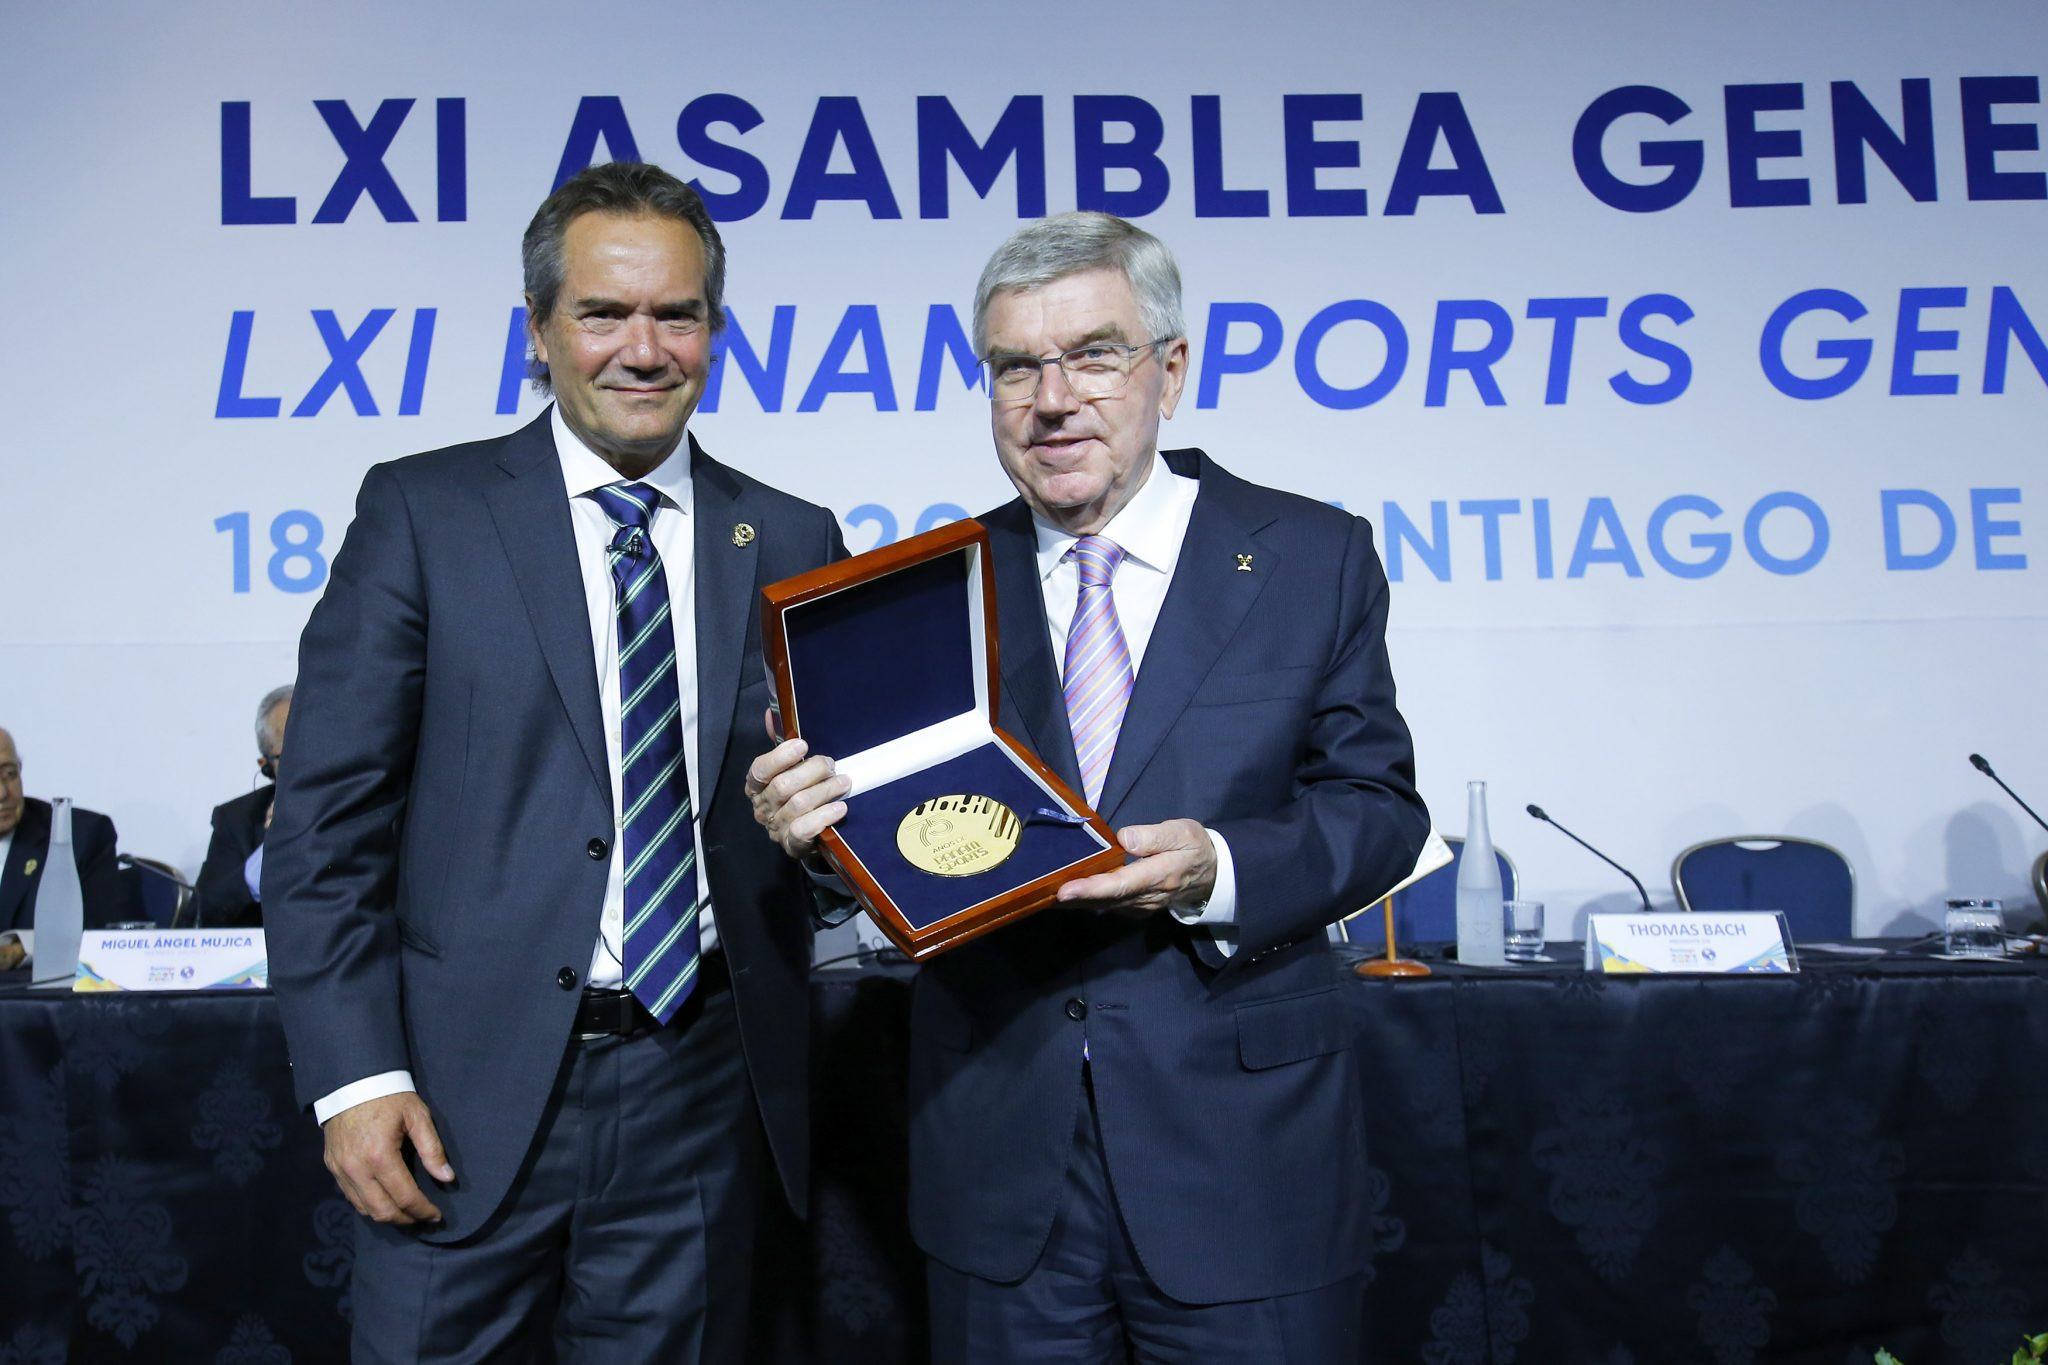 IOC President Thomas Bach received a commemorative plaque at the Panam Sports General Assembly ©Panam Sports (Image obtained at insidethegames.biz)